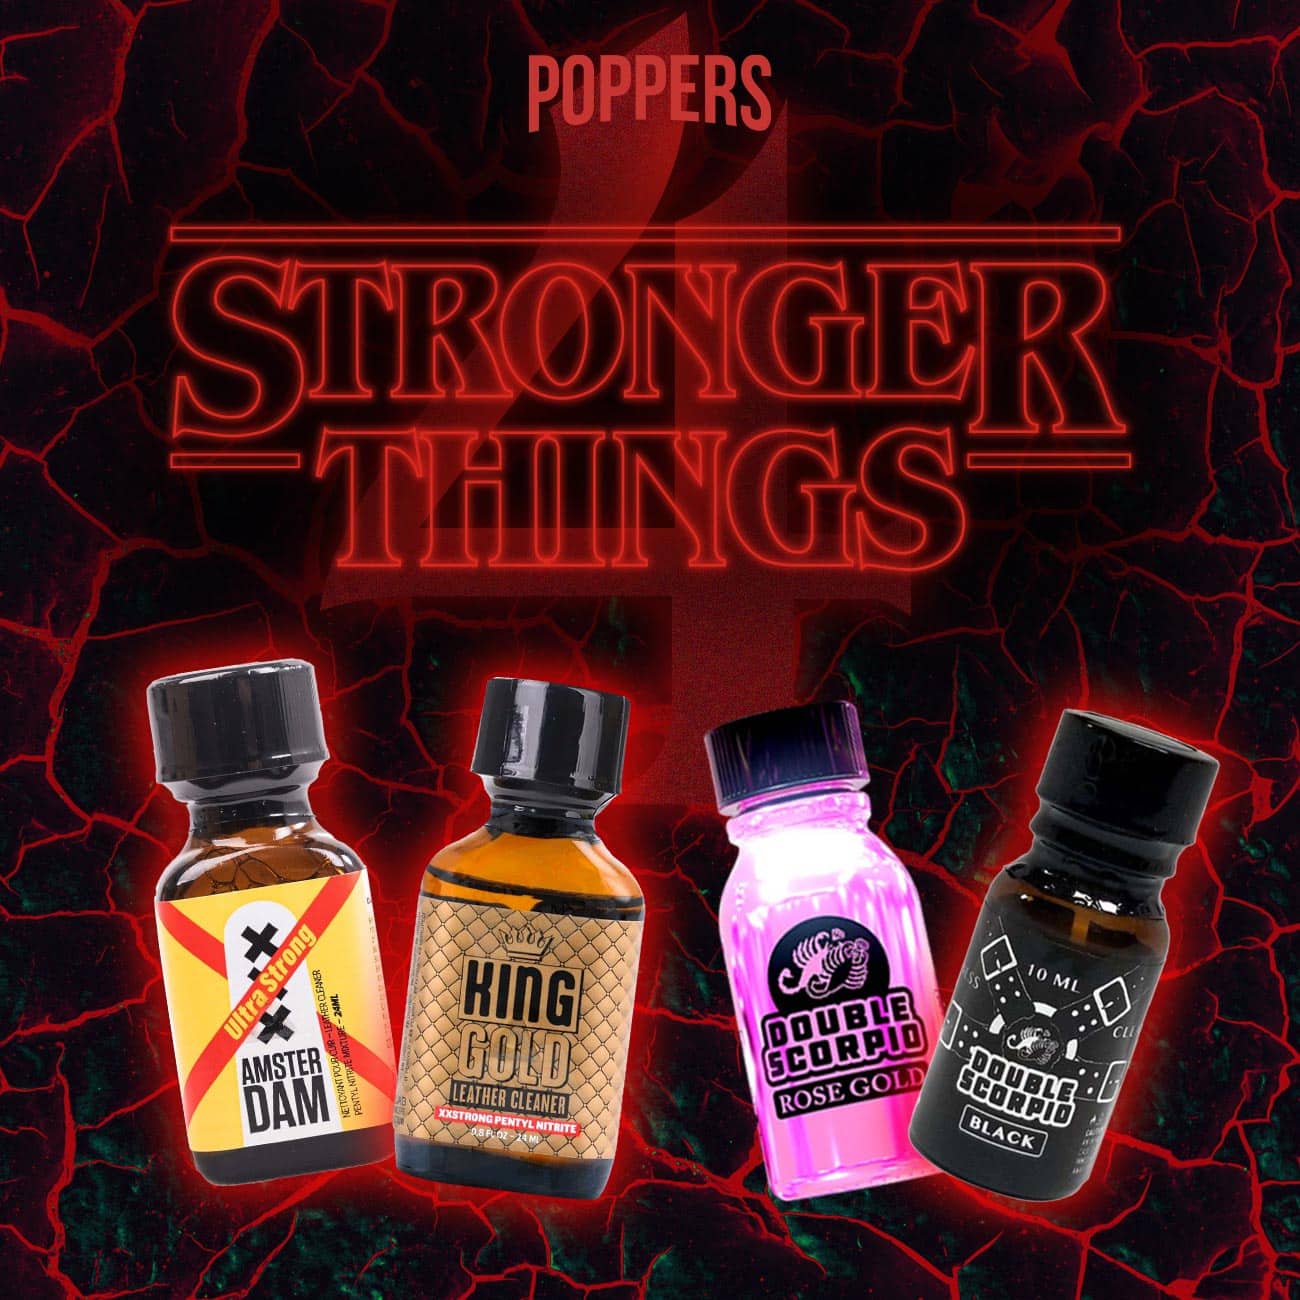 Stronger Things 4 Double Scorpio Prowler Poppers